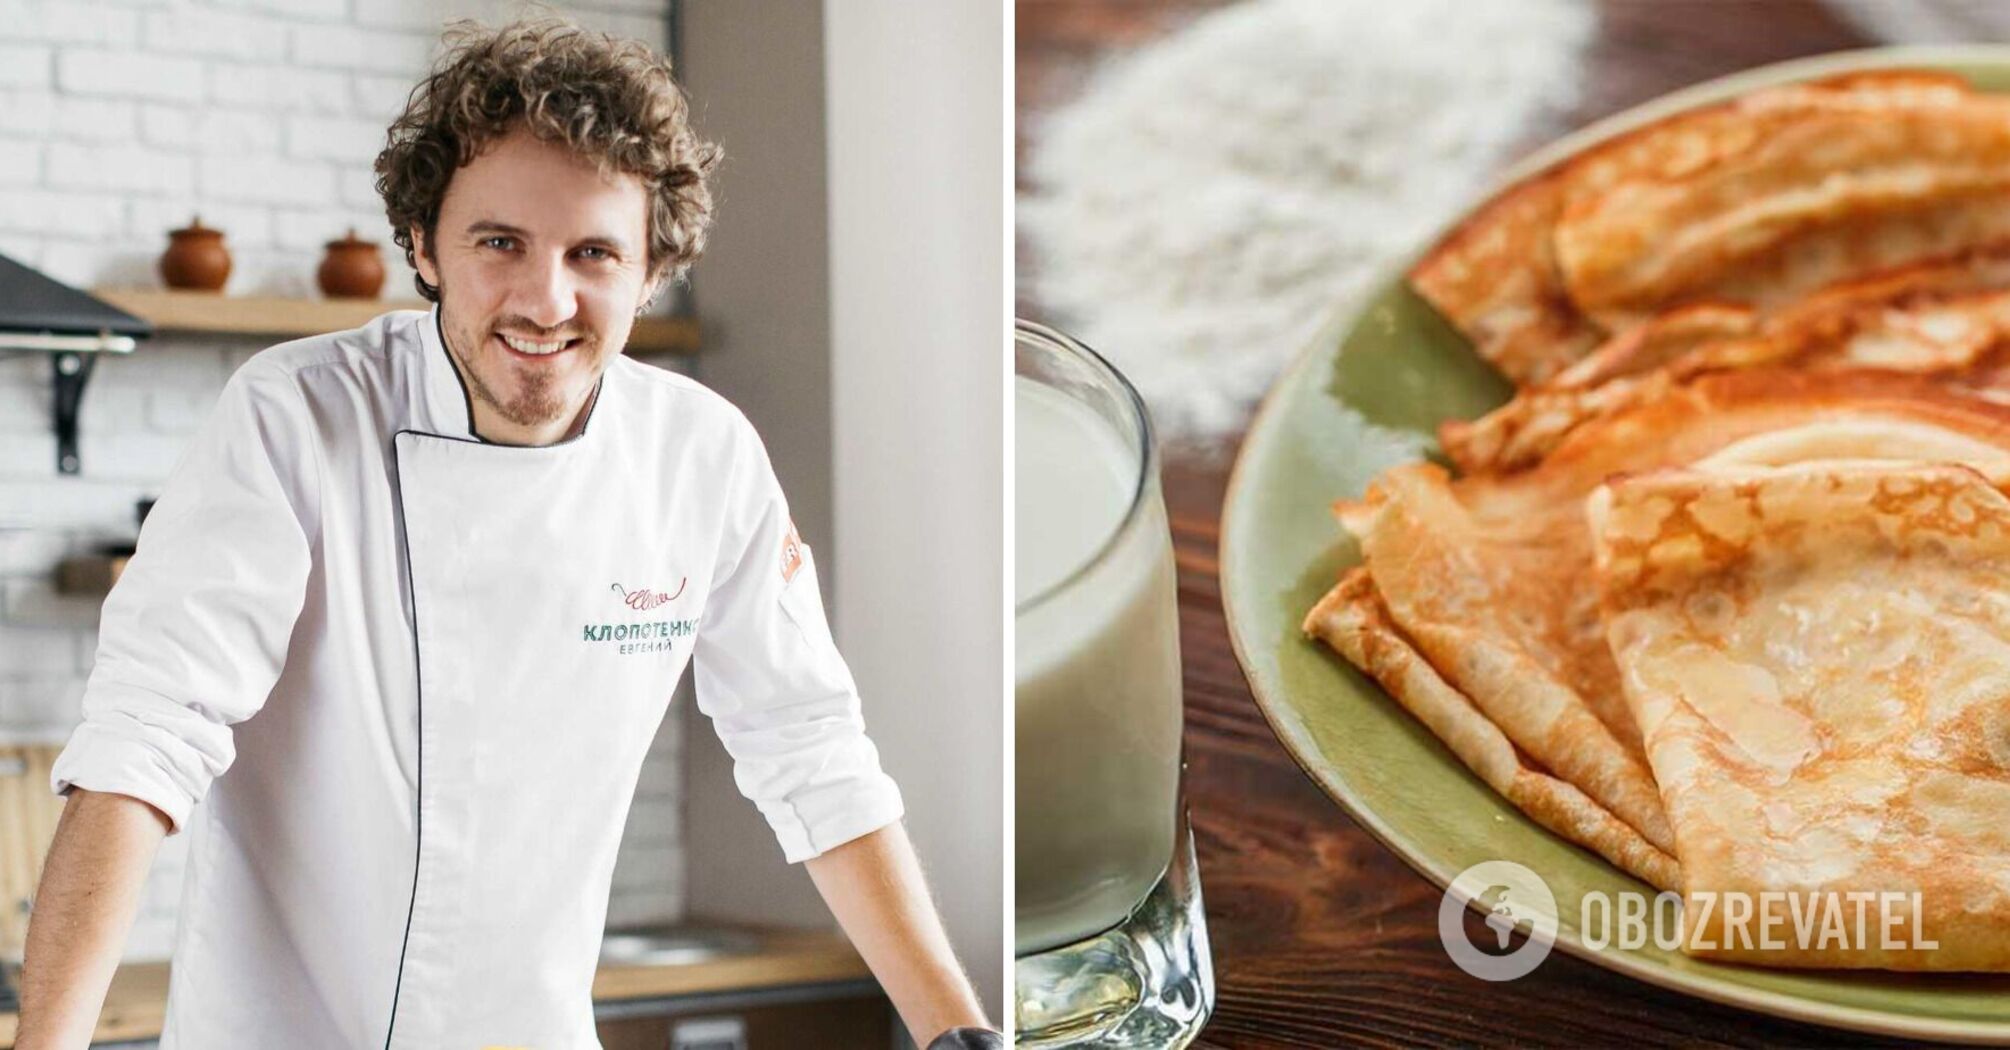 Klopotenko revealed the main secrets of cooking crepes